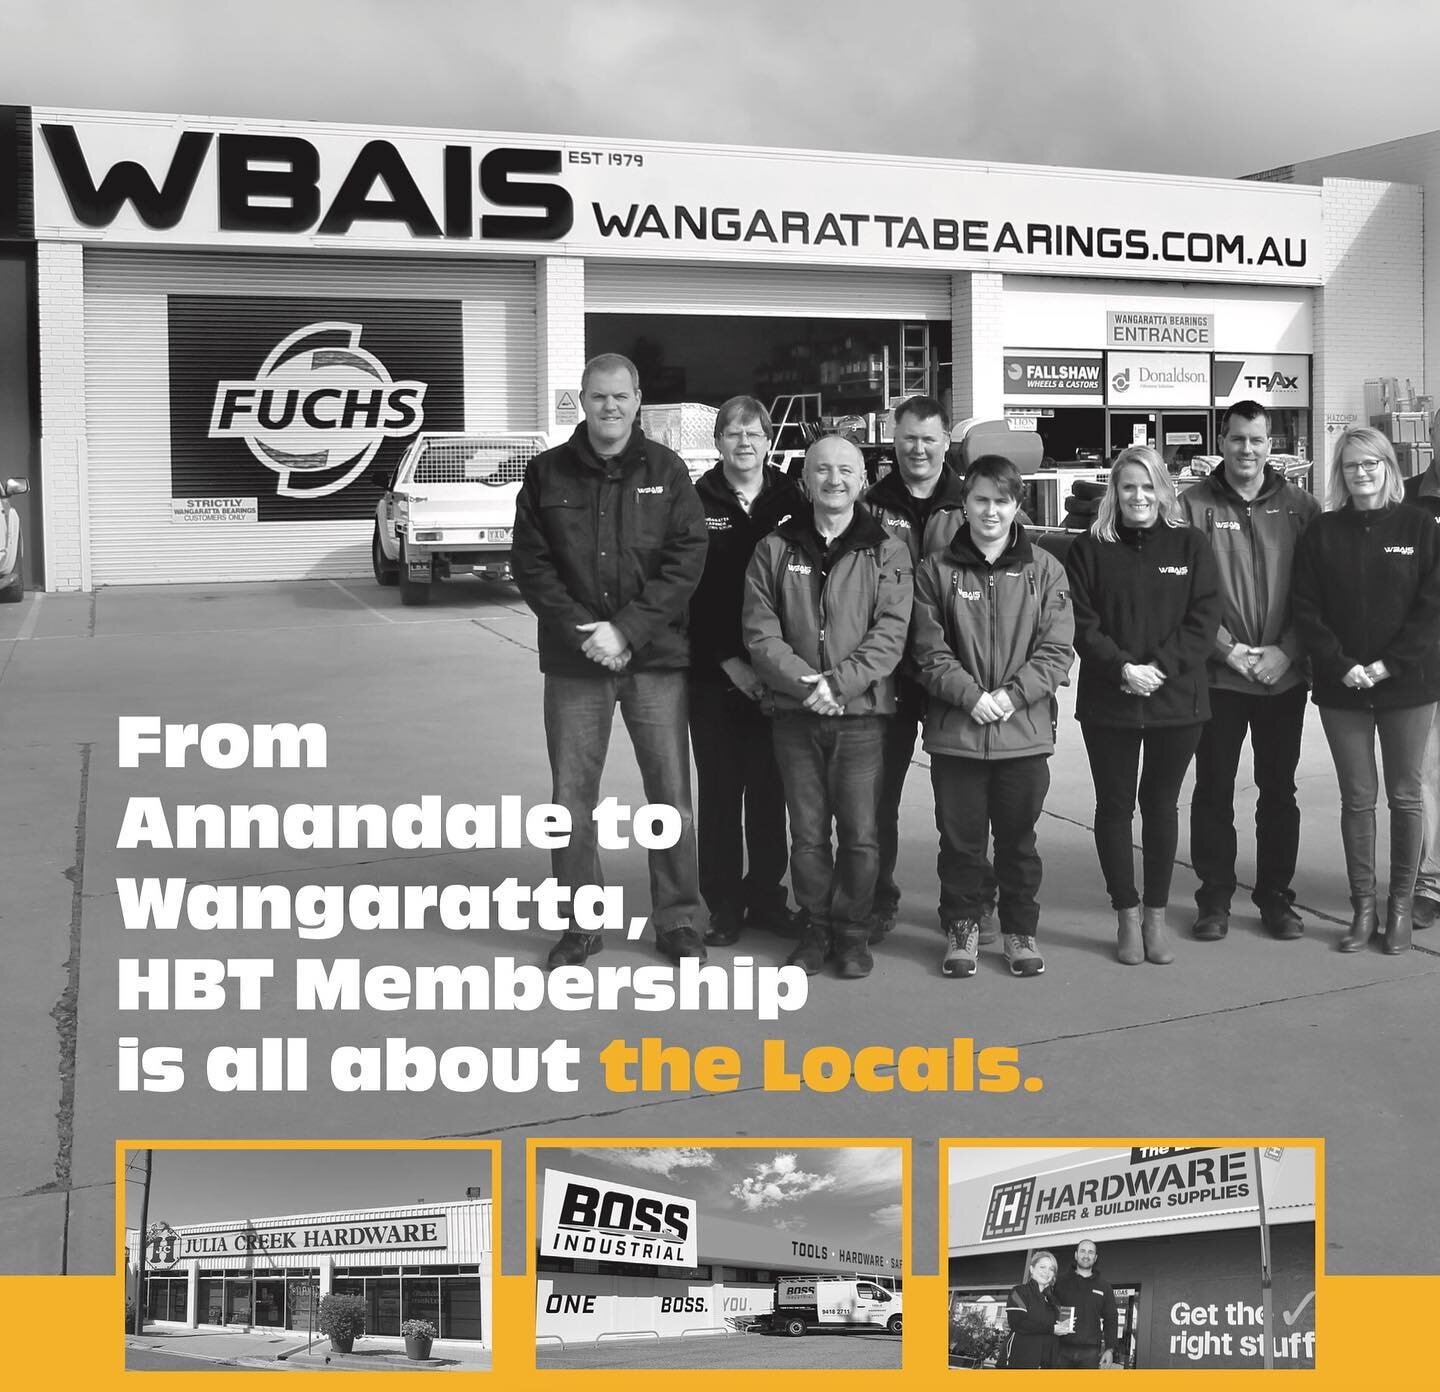 HBT have been helping local independent businesses across Australia for over two decades. Our highly experienced team supports over 950 Members with the tools, supplier negotiation for competitive pricing and generous rebates to operate a successful 